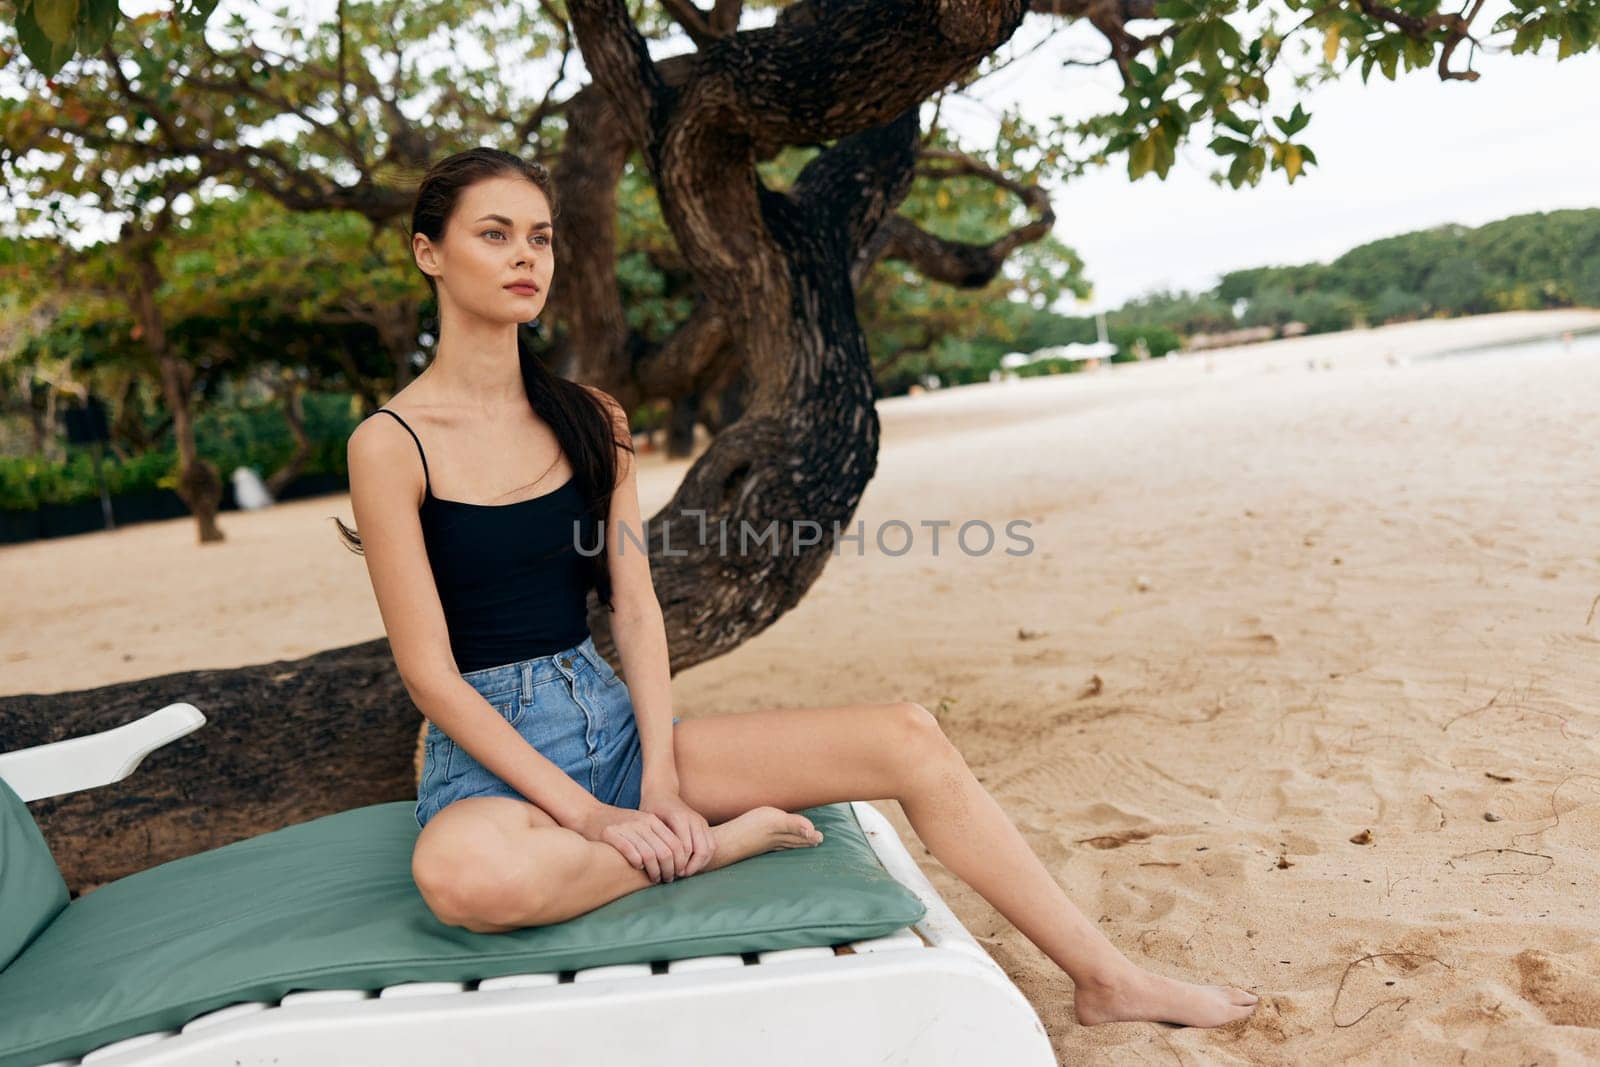 woman young sea lying beach ocean bikini chair resting holiday rest sand tan smiling attractive lifestyle resort vacation sitting travel sunbed